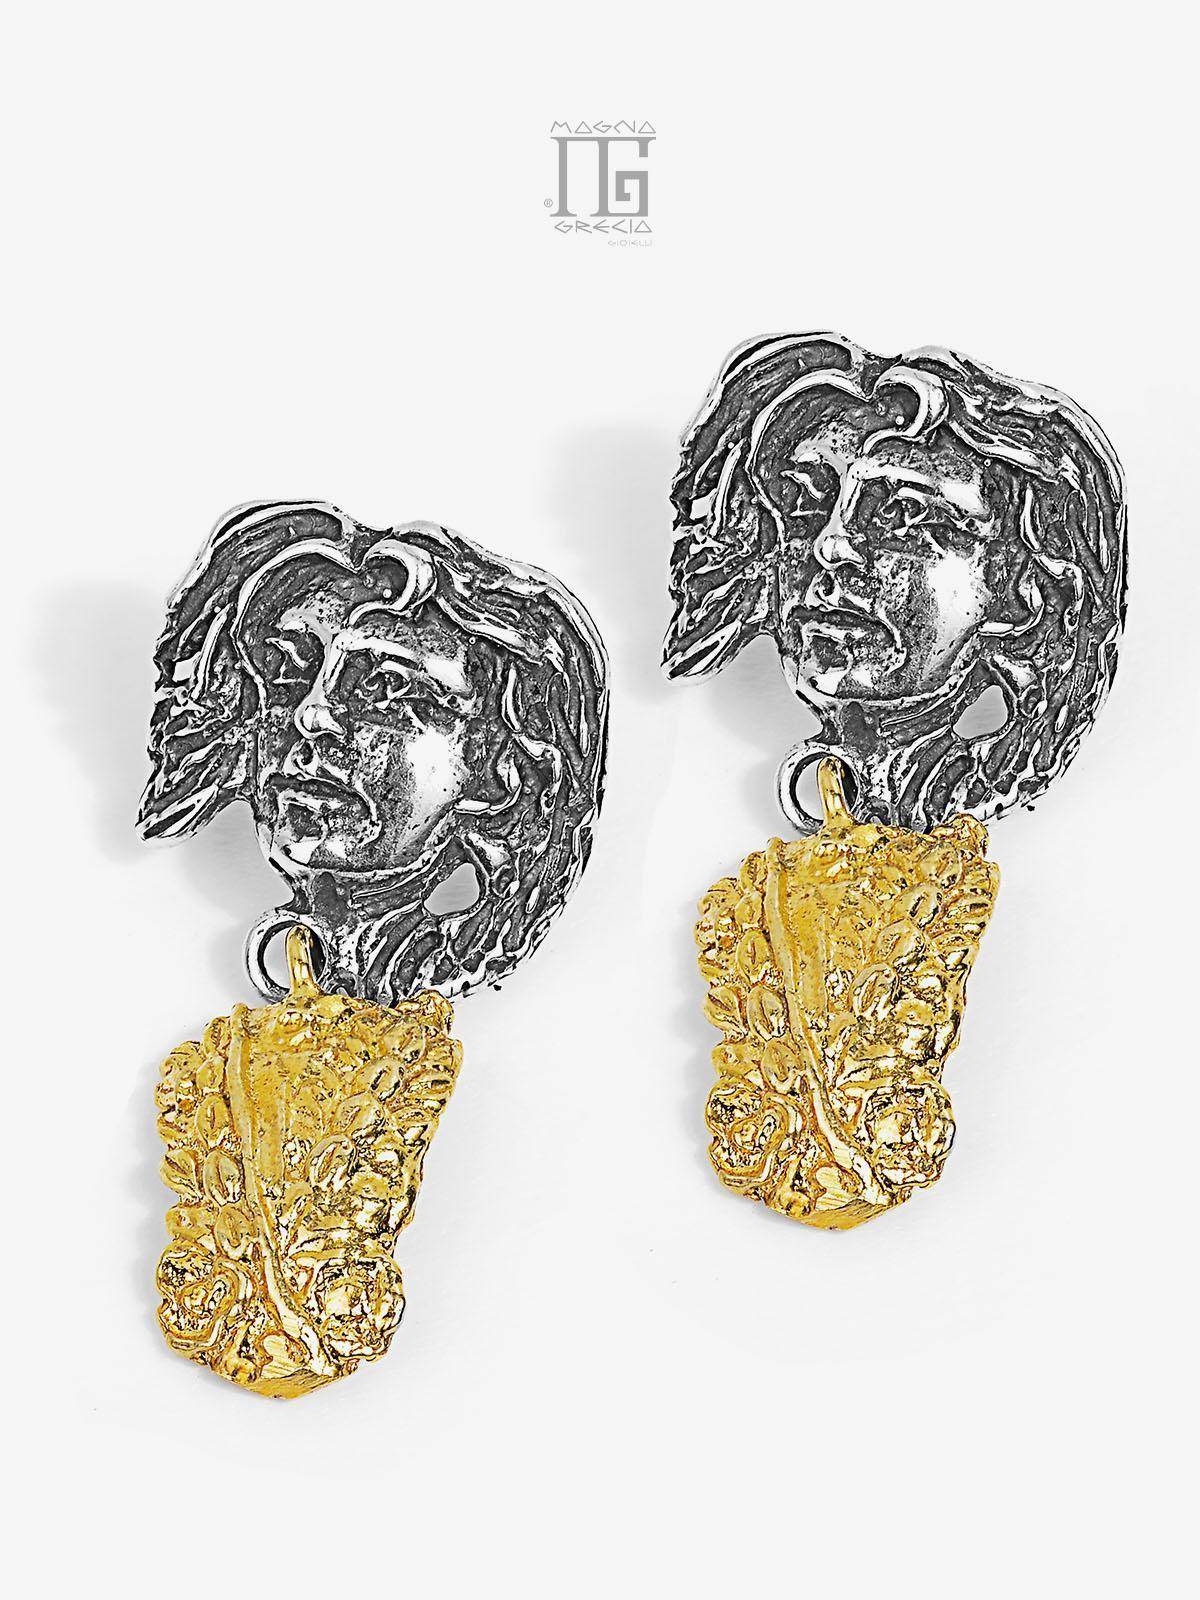 “Spring” pendant earrings in Silver depicting the Face of the Goddess Venus and Ear of Wheat Cod. MGK 3718 V-1